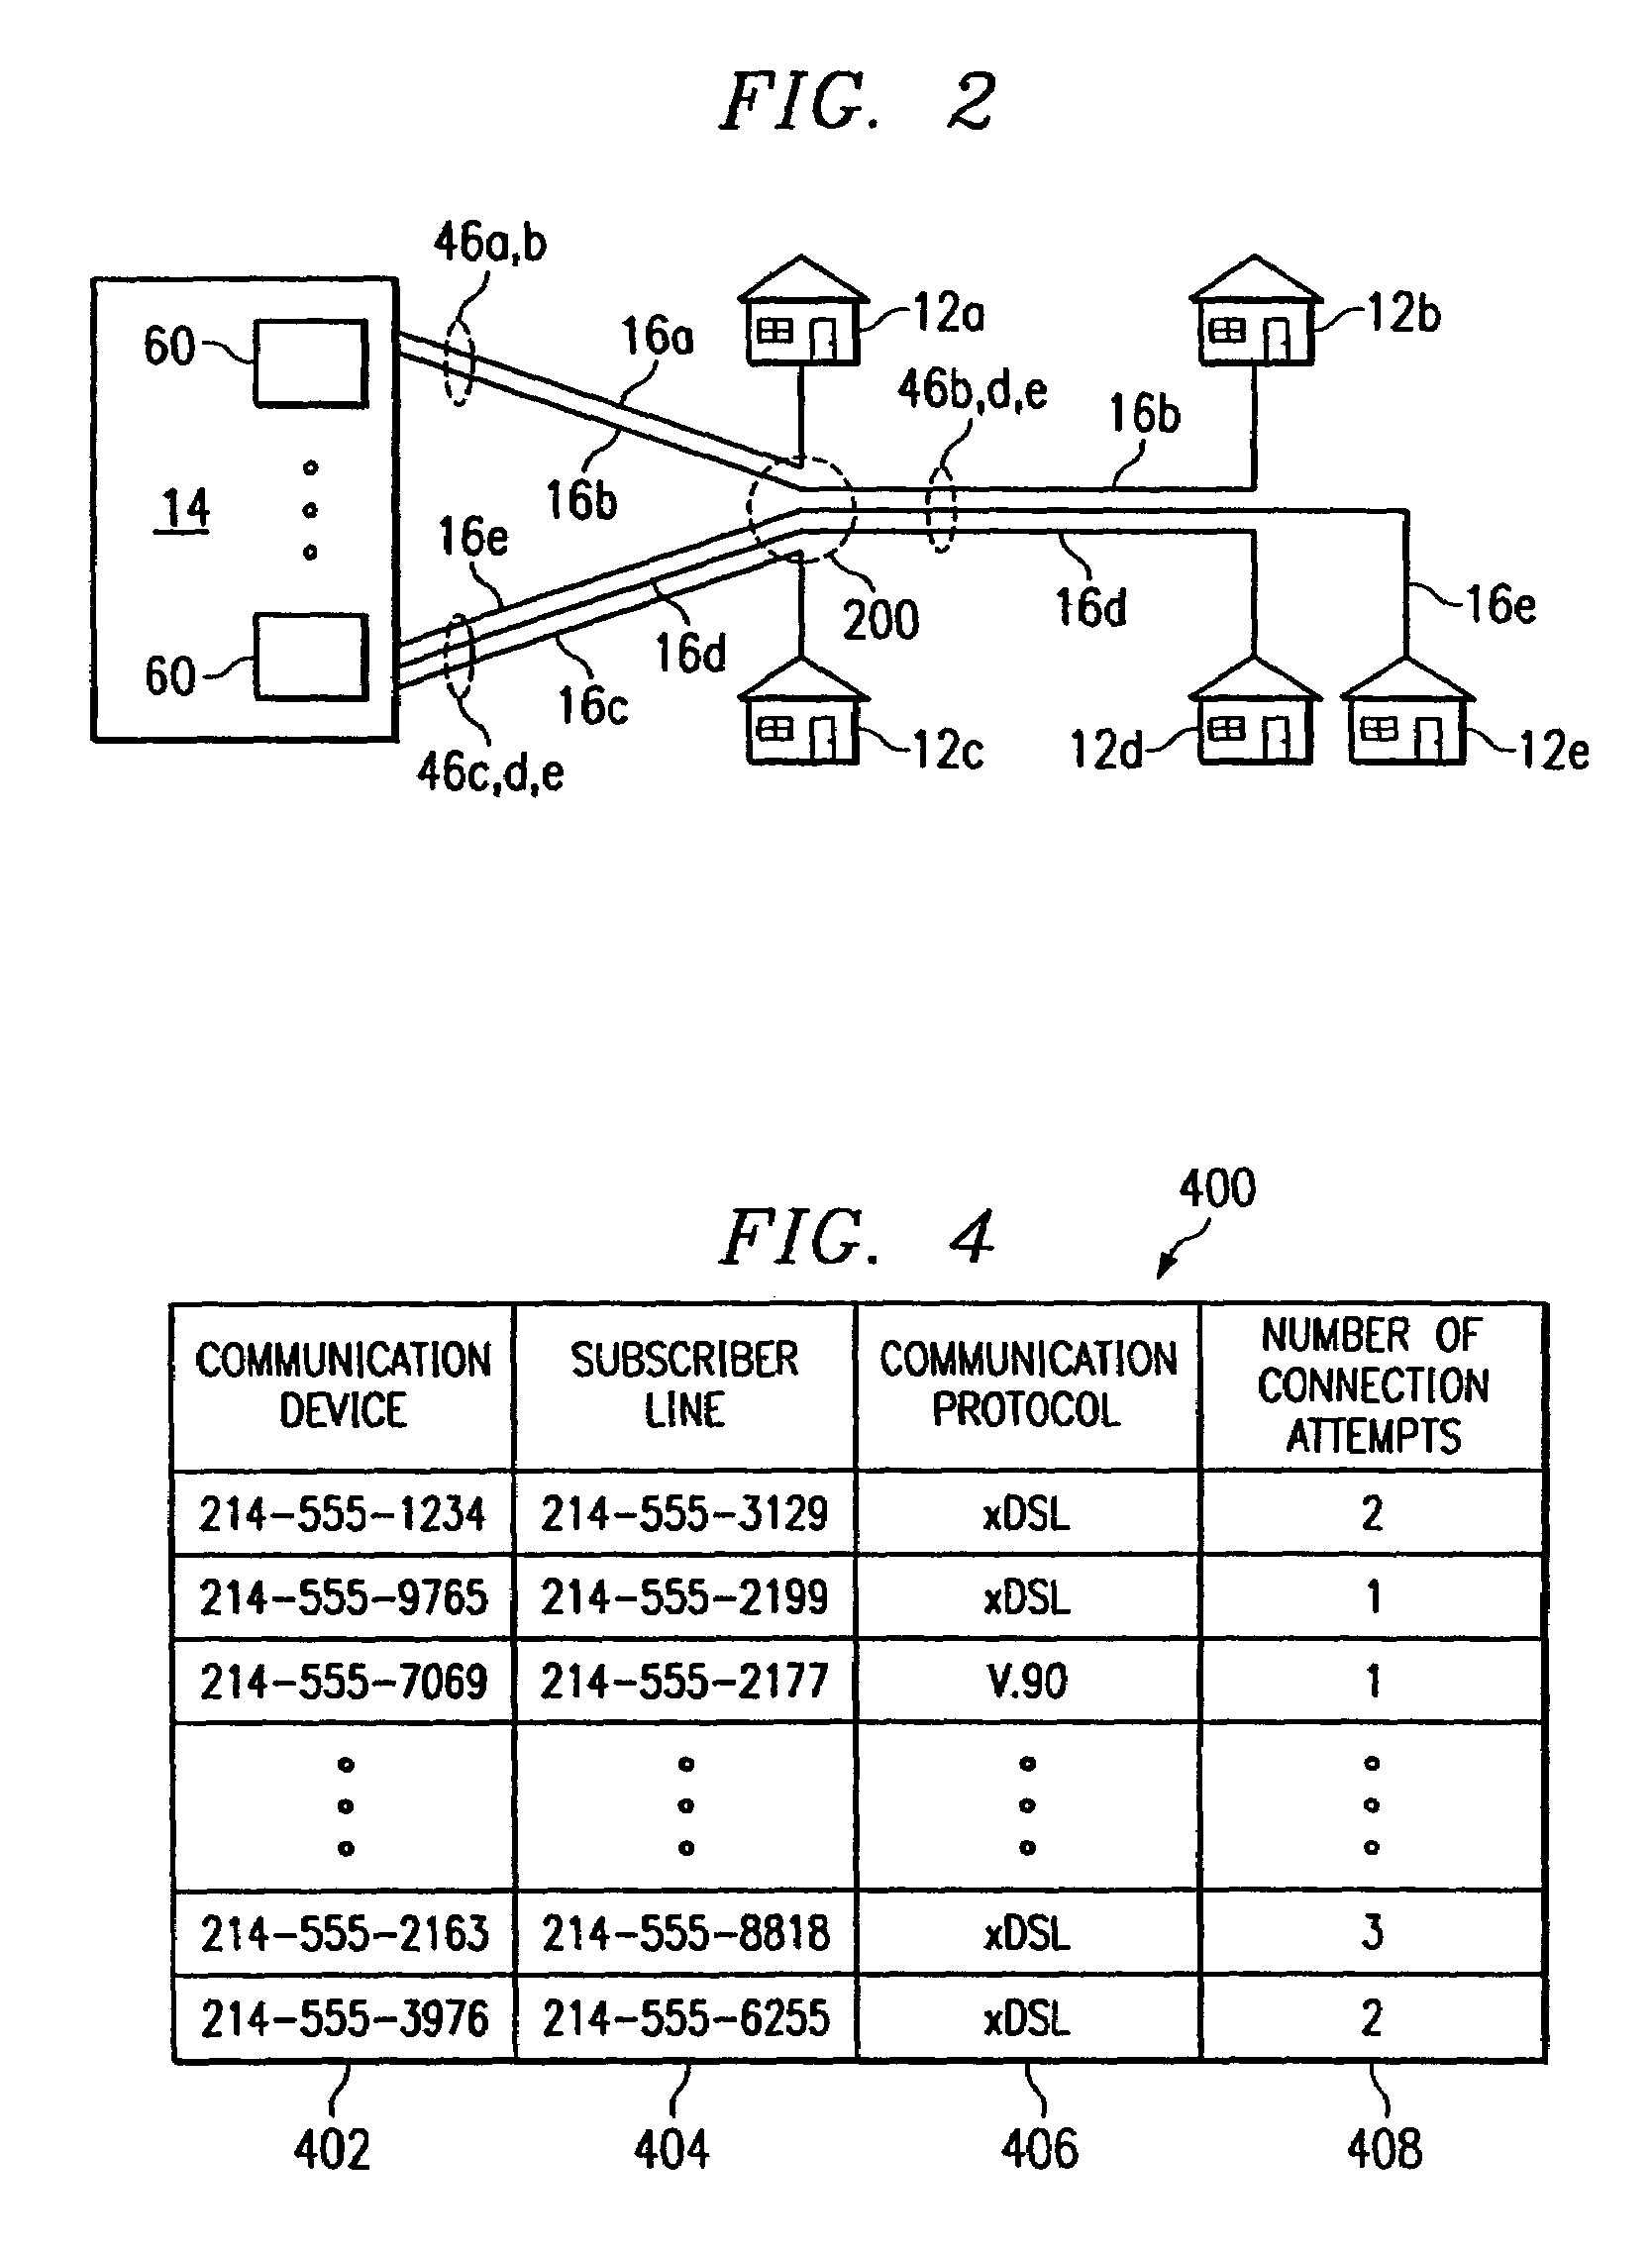 System and method for determining the transmit power of a communication device operating on digital subscriber lines